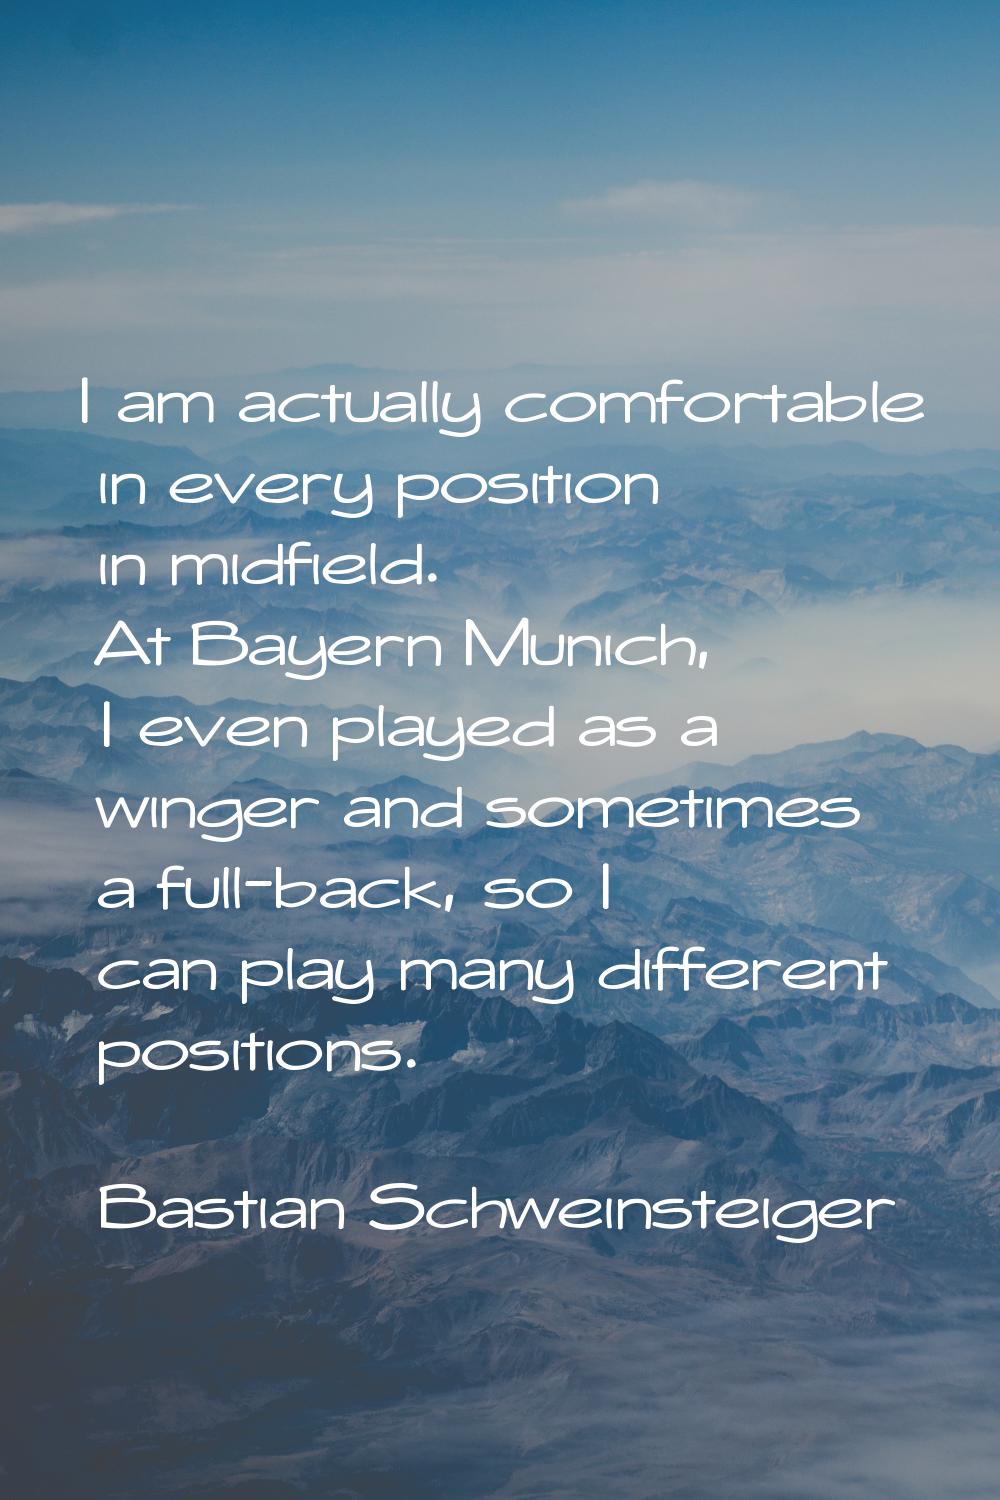 I am actually comfortable in every position in midfield. At Bayern Munich, I even played as a winge